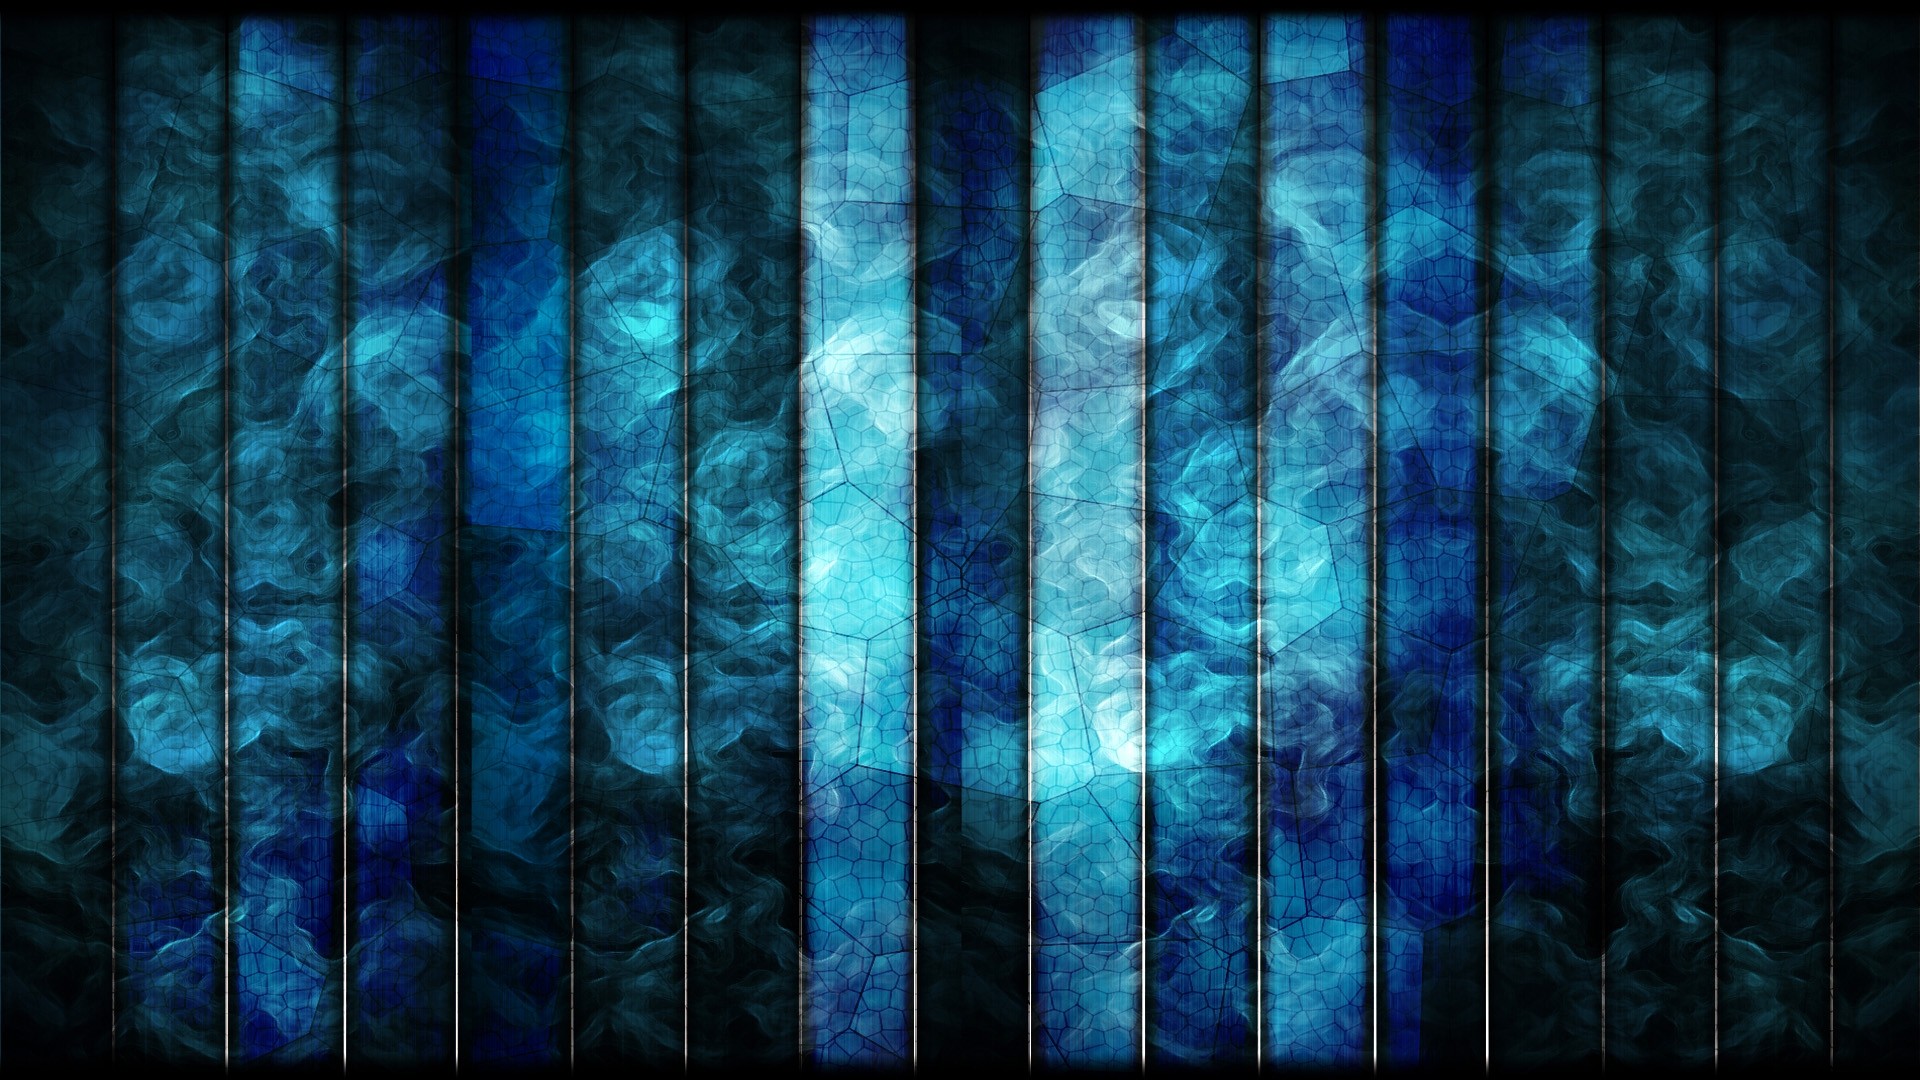 Black And Blue Wallpaper image hd